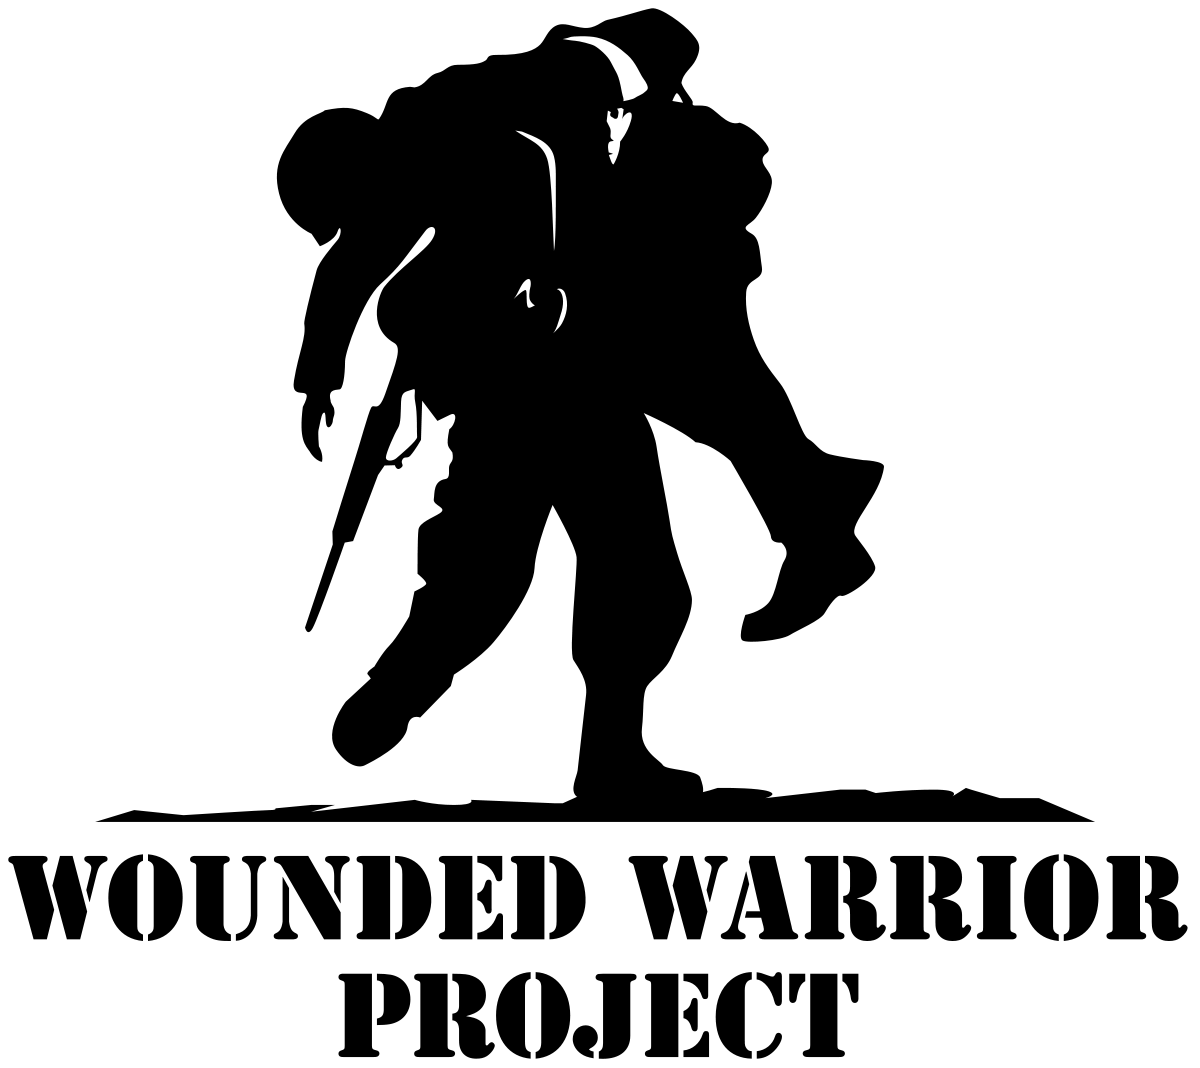 WOUNDED WARRIOR PROJECT.jpg